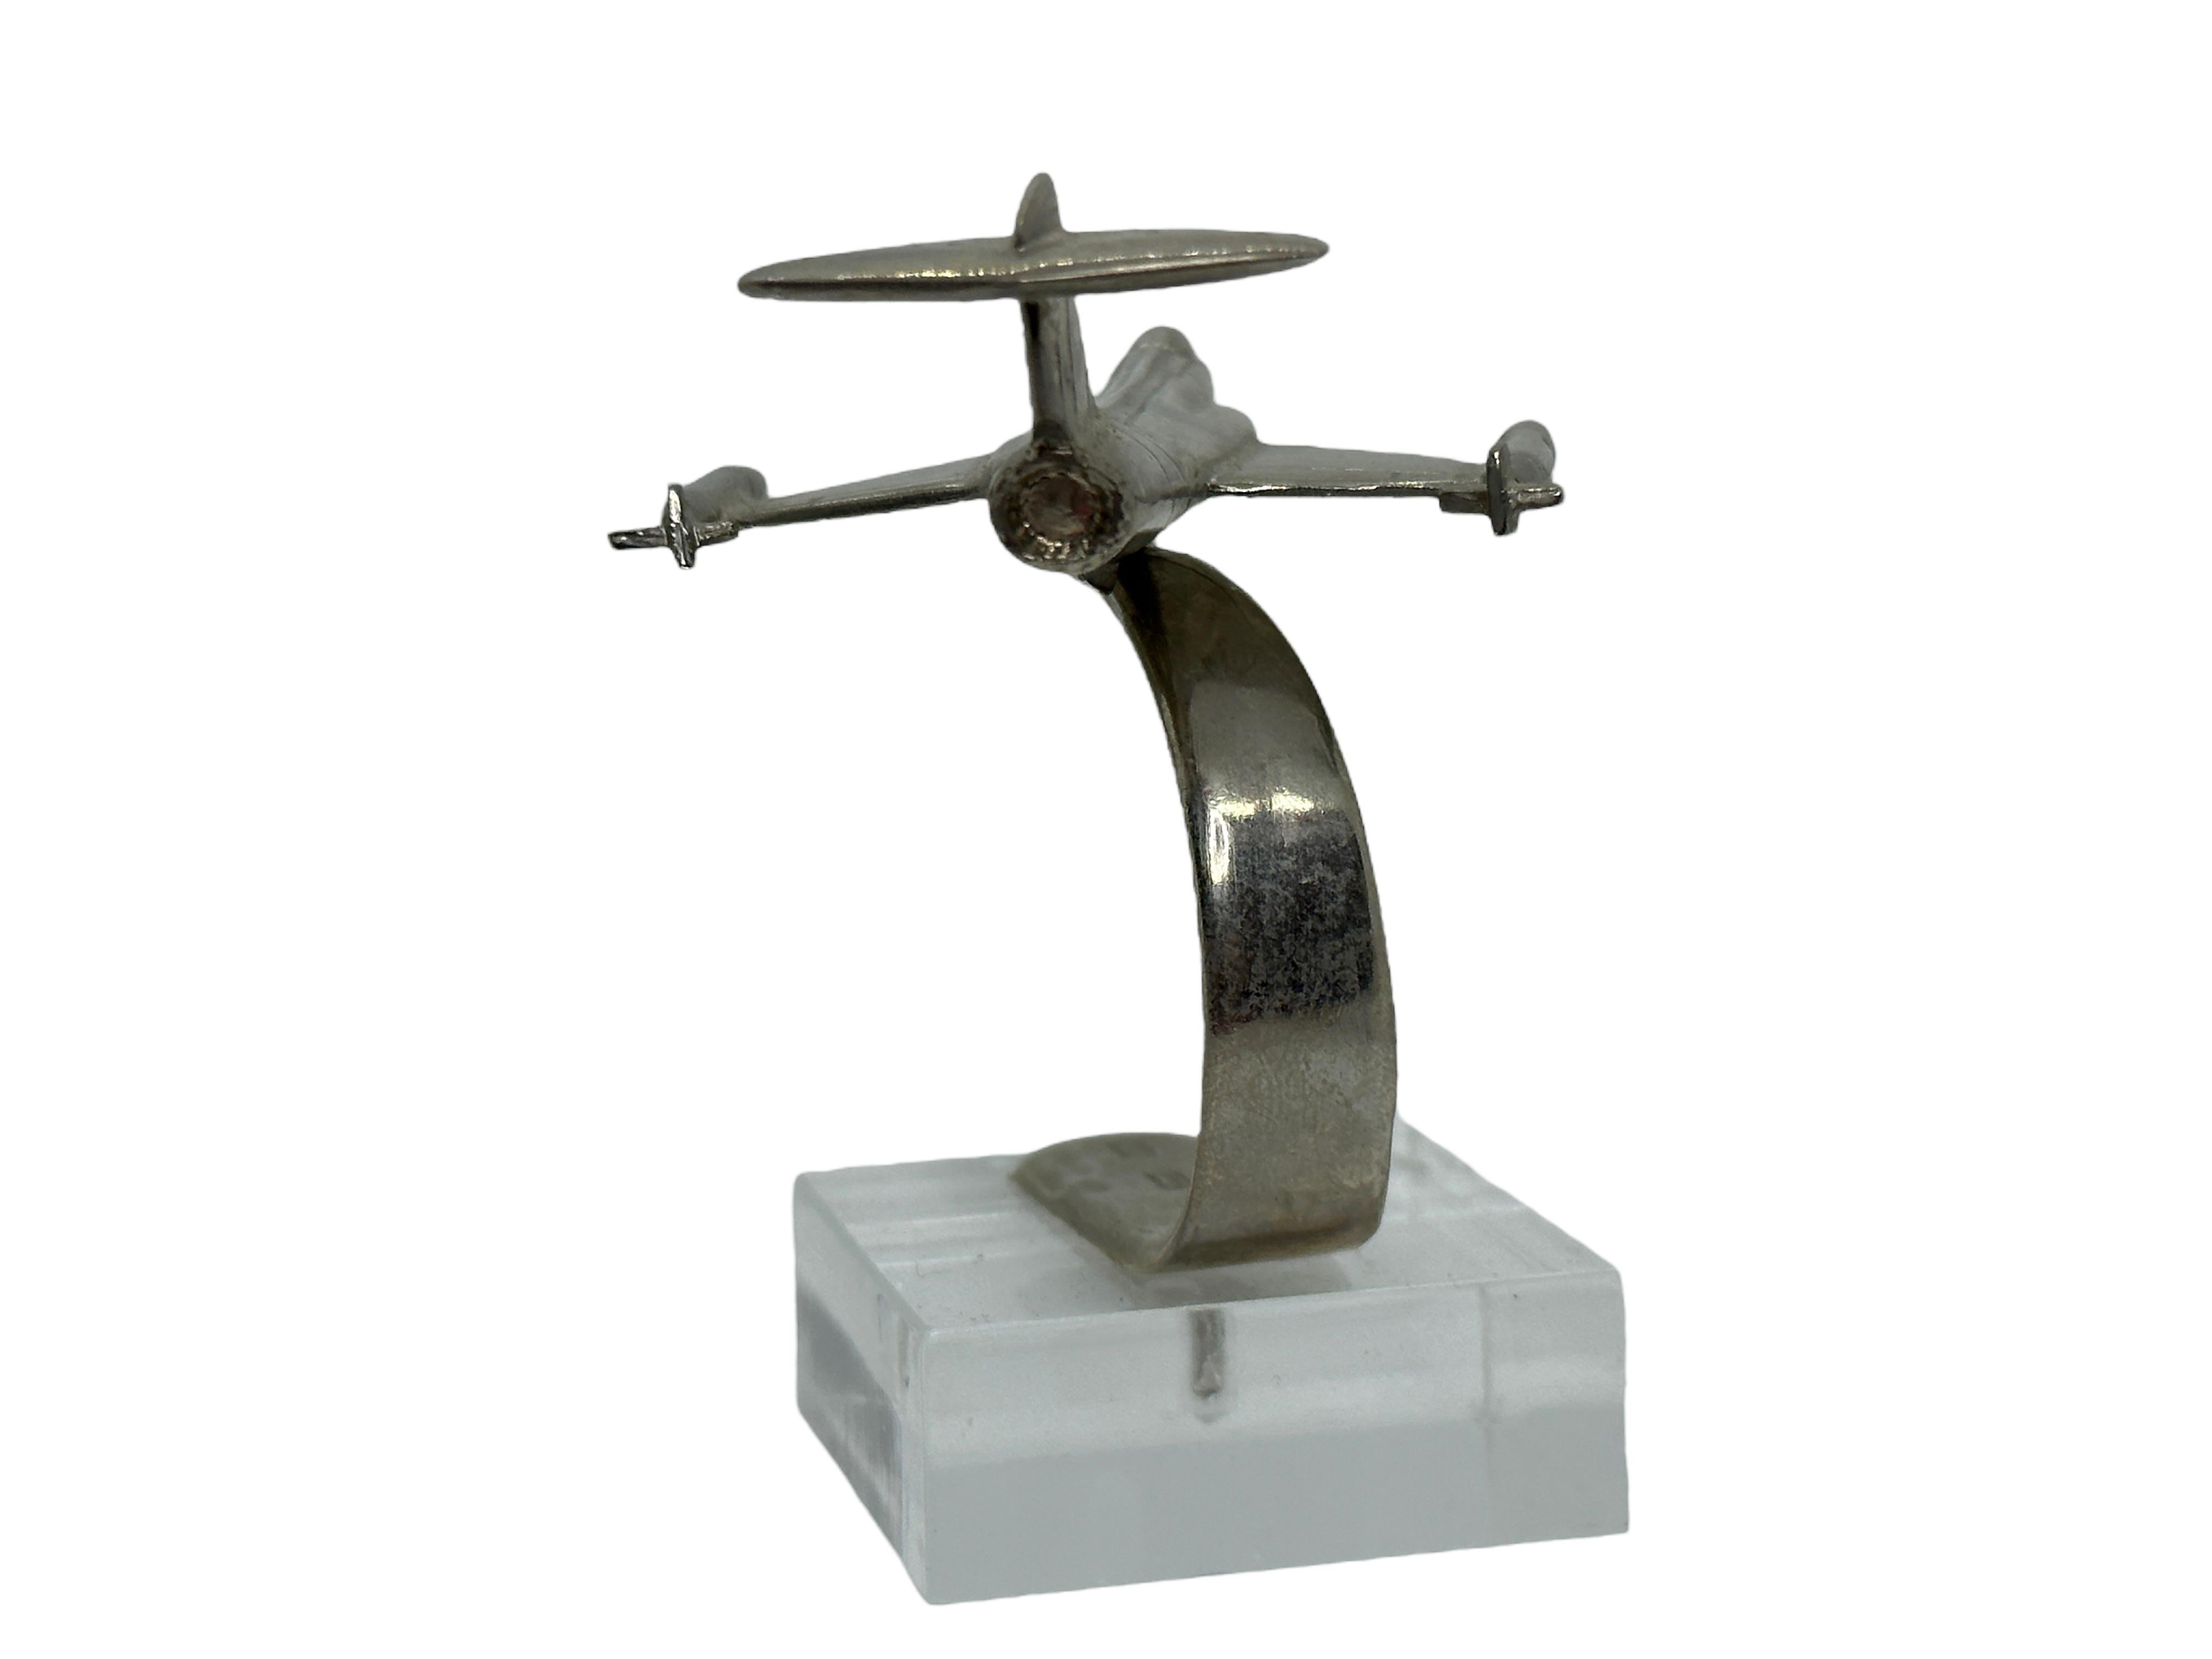 Late 20th Century Industrial Vintage Metal Aircraft Jet Plane Model Desk Item Statue, circa 1980s For Sale